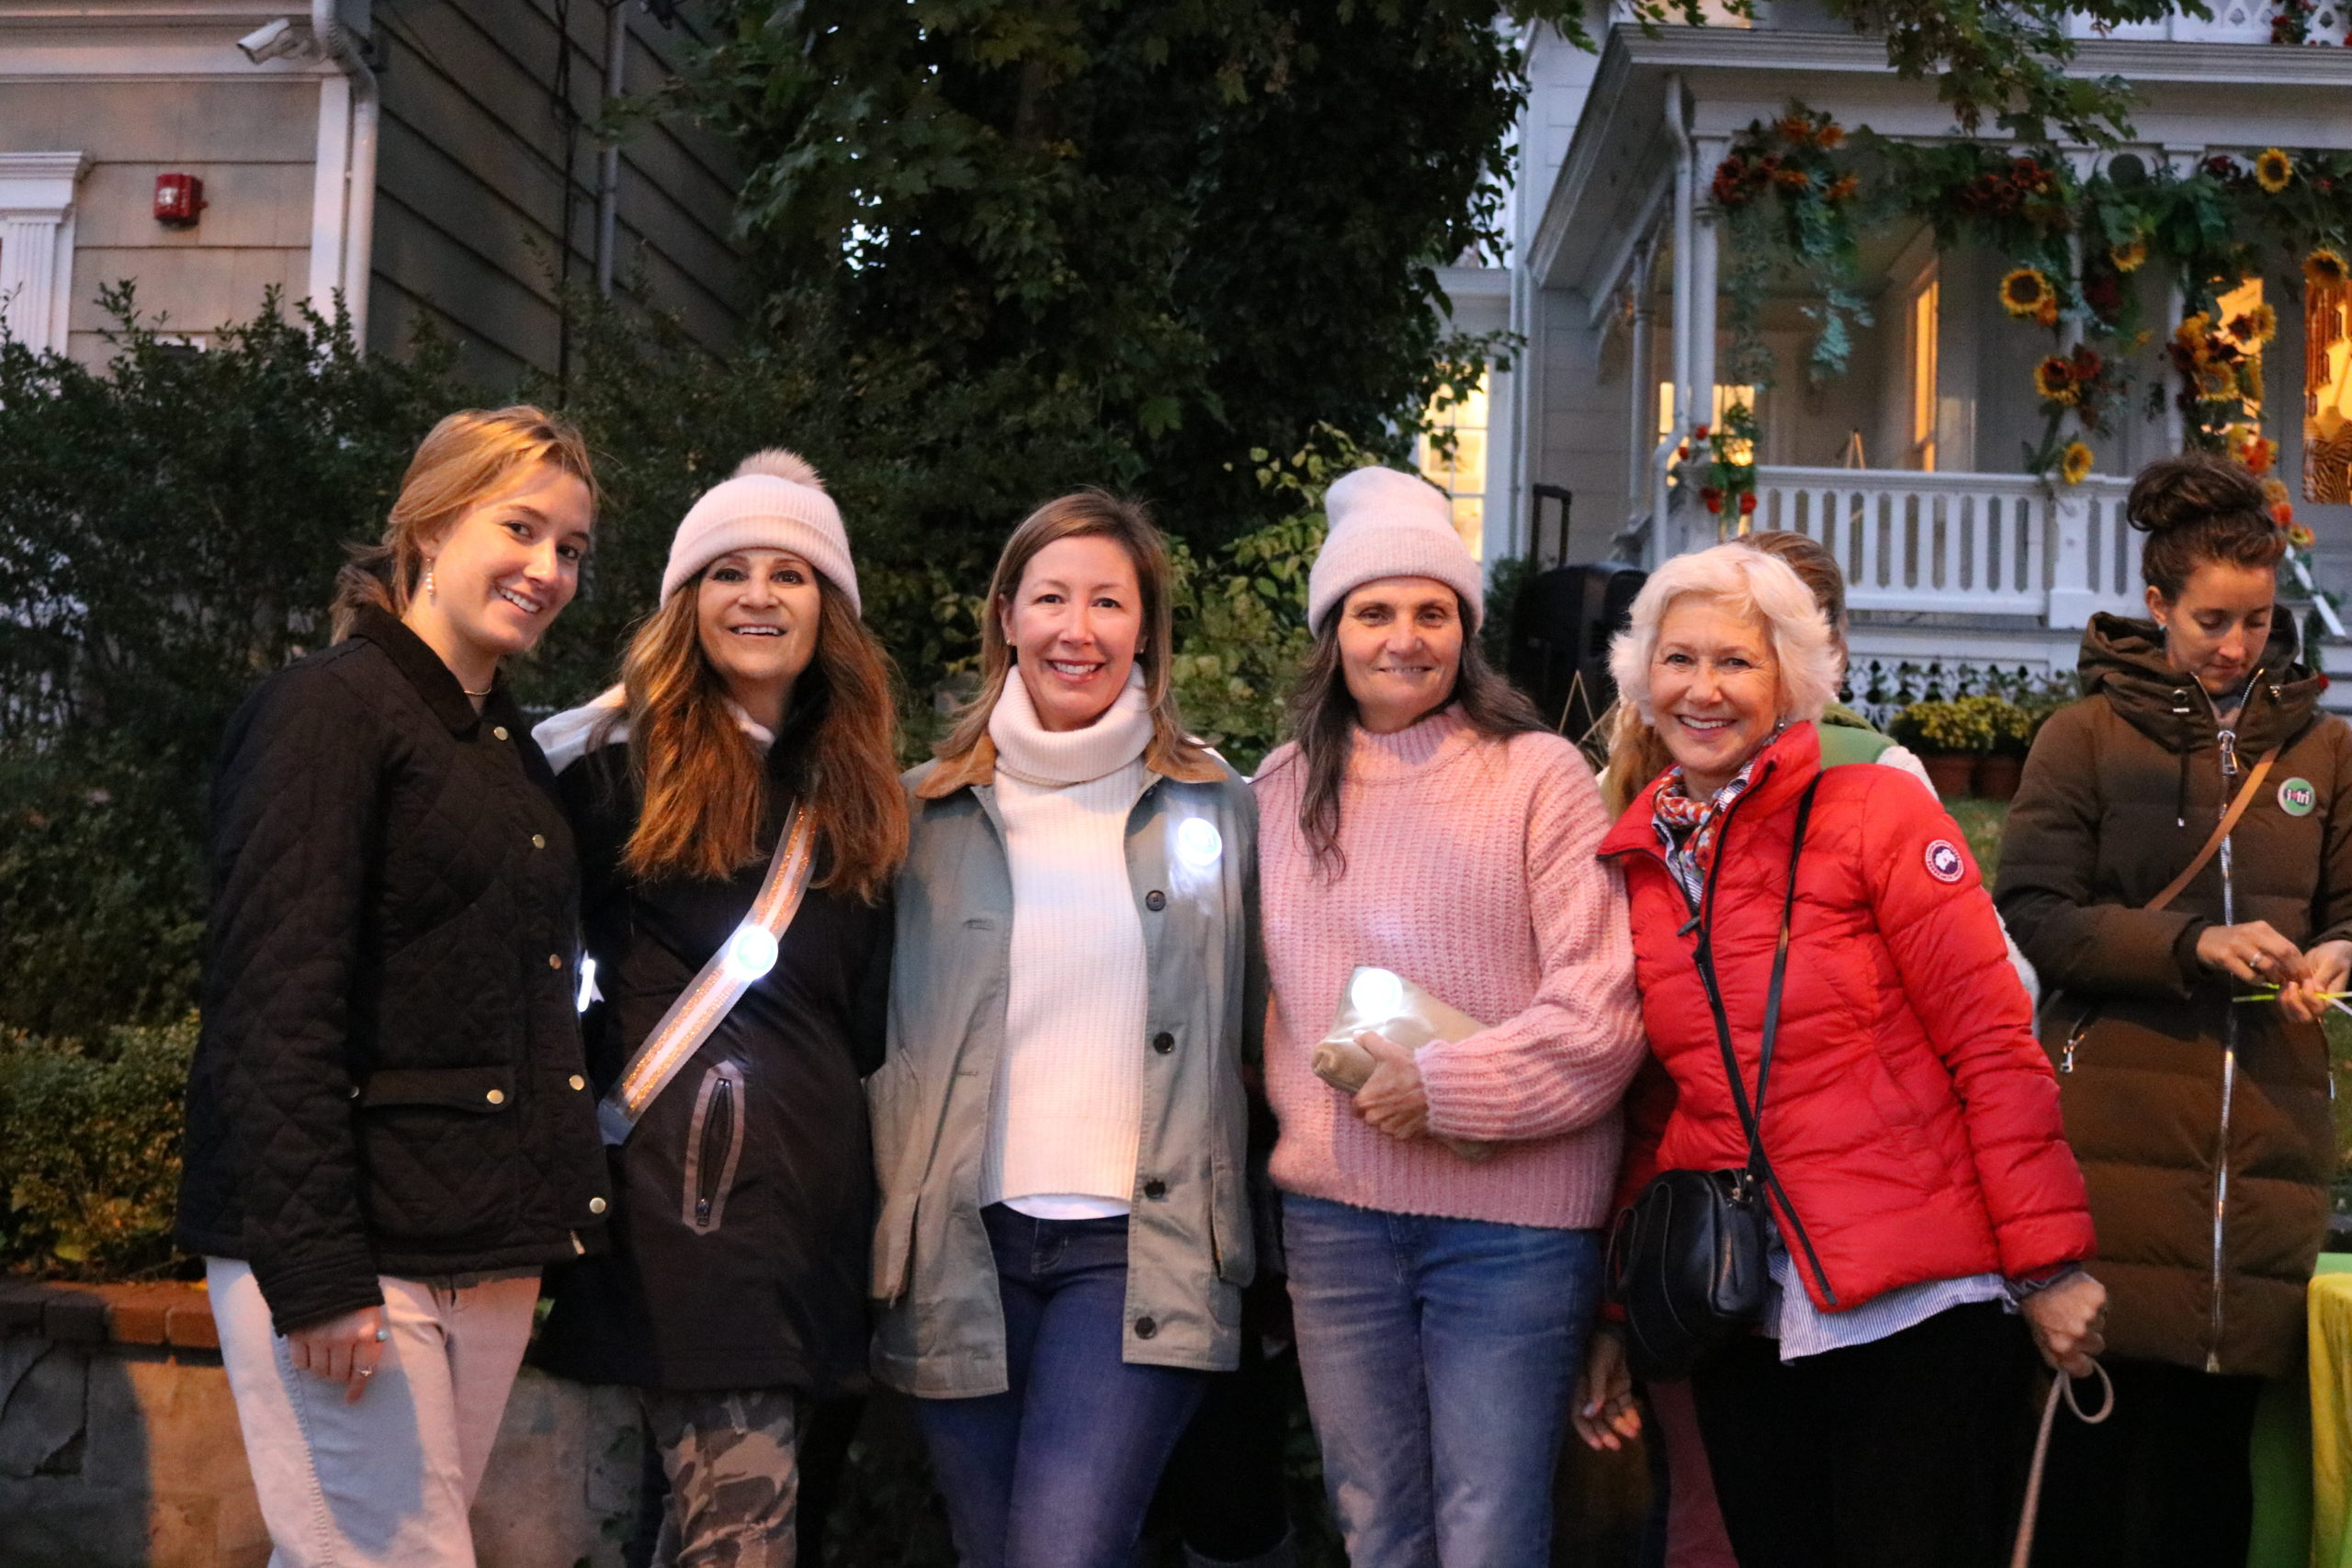 From left, Maddy Brown, Lynn Blumenfeld, Rose Brown, Michele Musnicki and Judi Caron were among the participants in Light the Night.